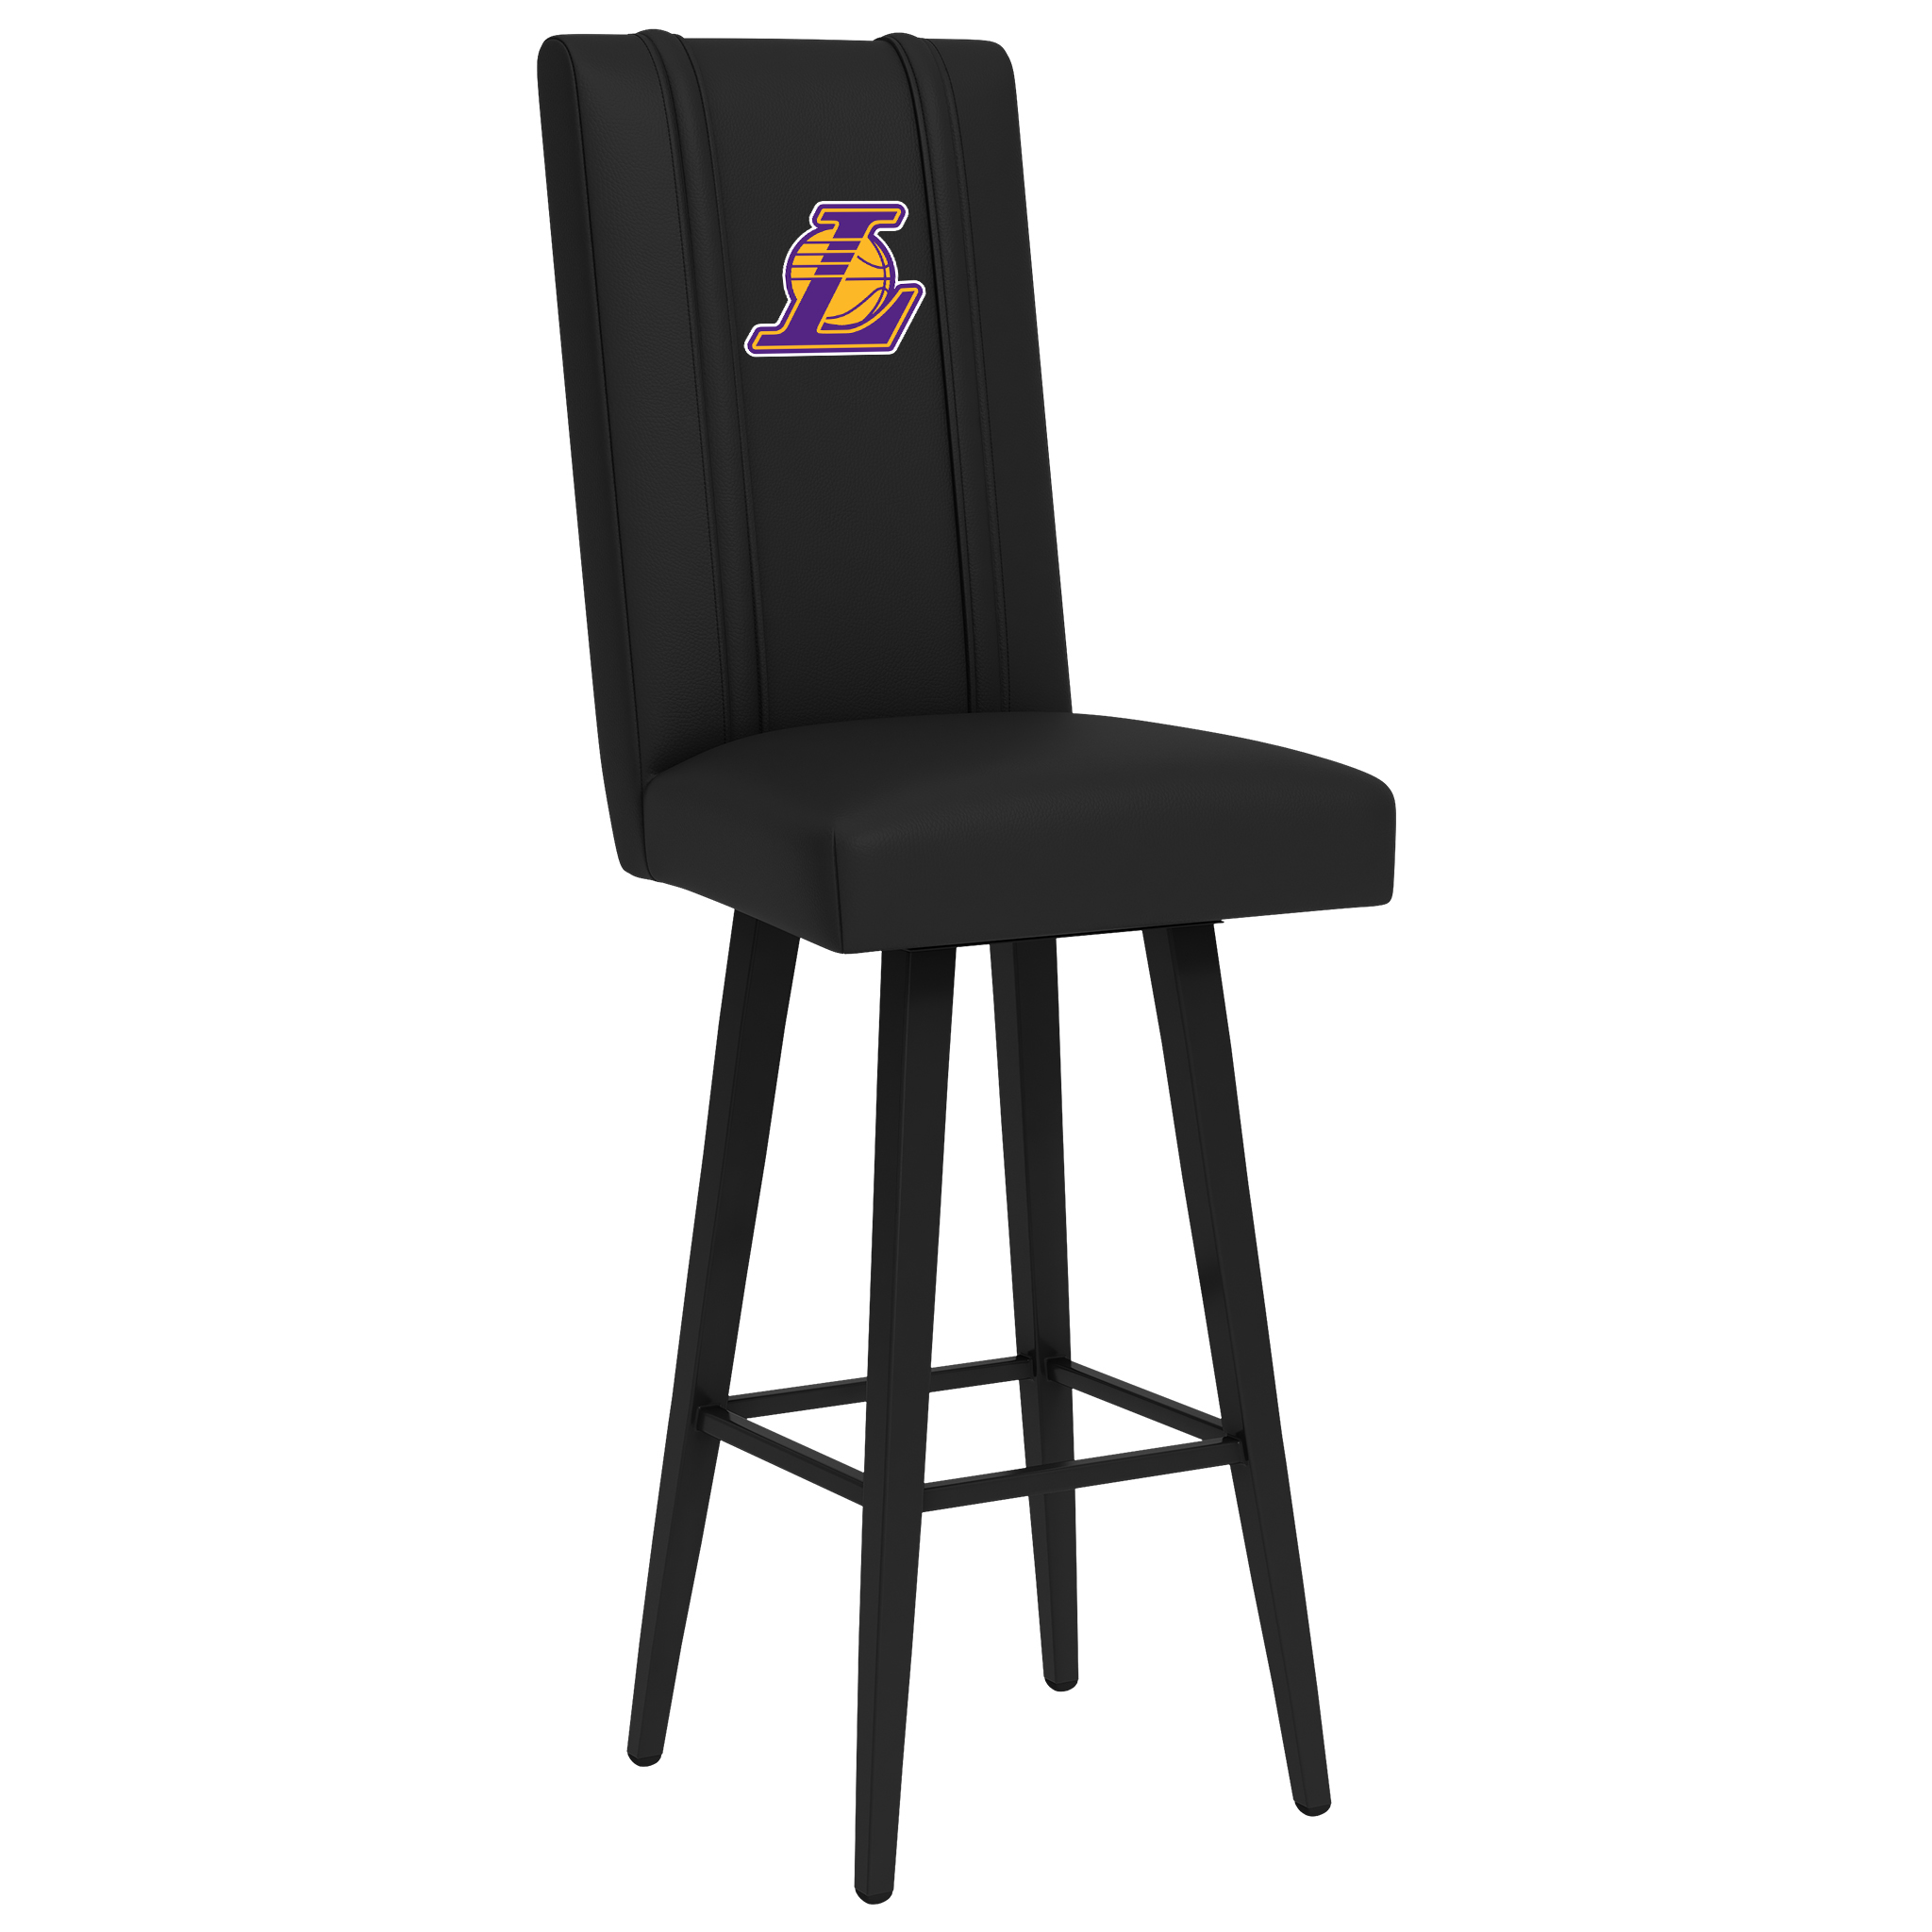 Los Angeles Lakers Swivel Bar Stool 2000 With Los Angeles Lakers Secondary